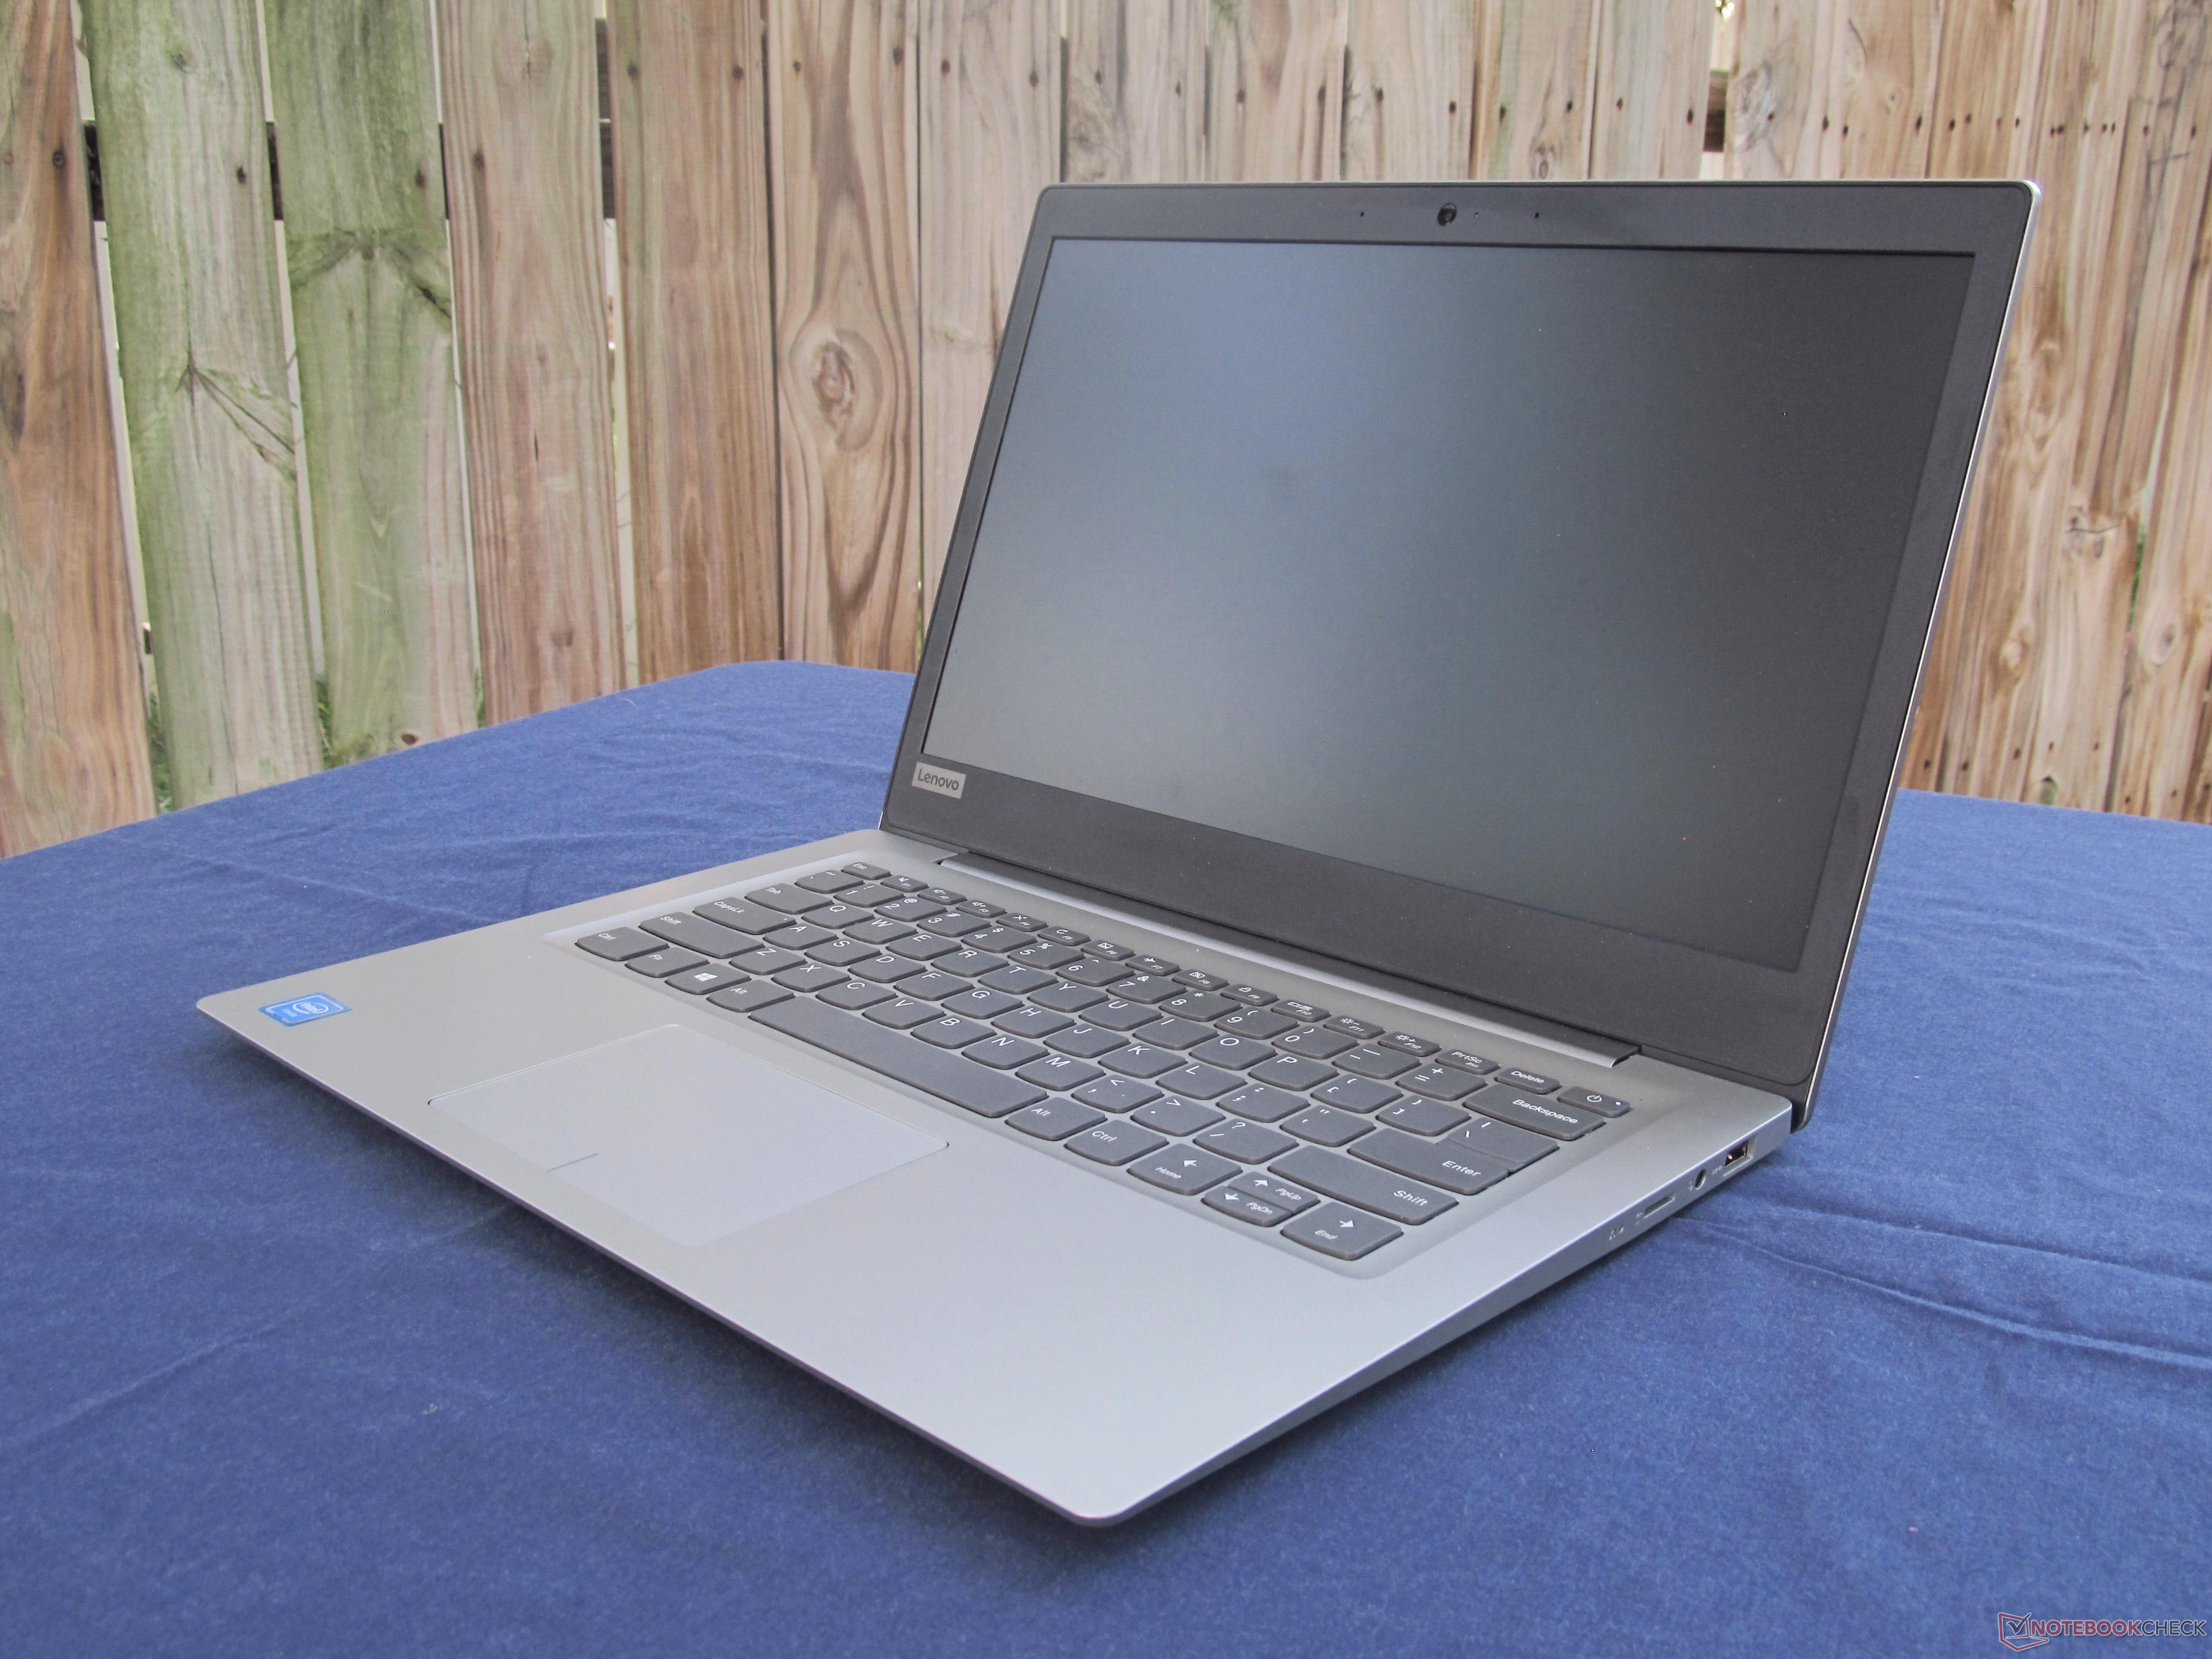 Lenovo Ideapad 120s (11-inch) Notebook Review - NotebookCheck.net Reviews